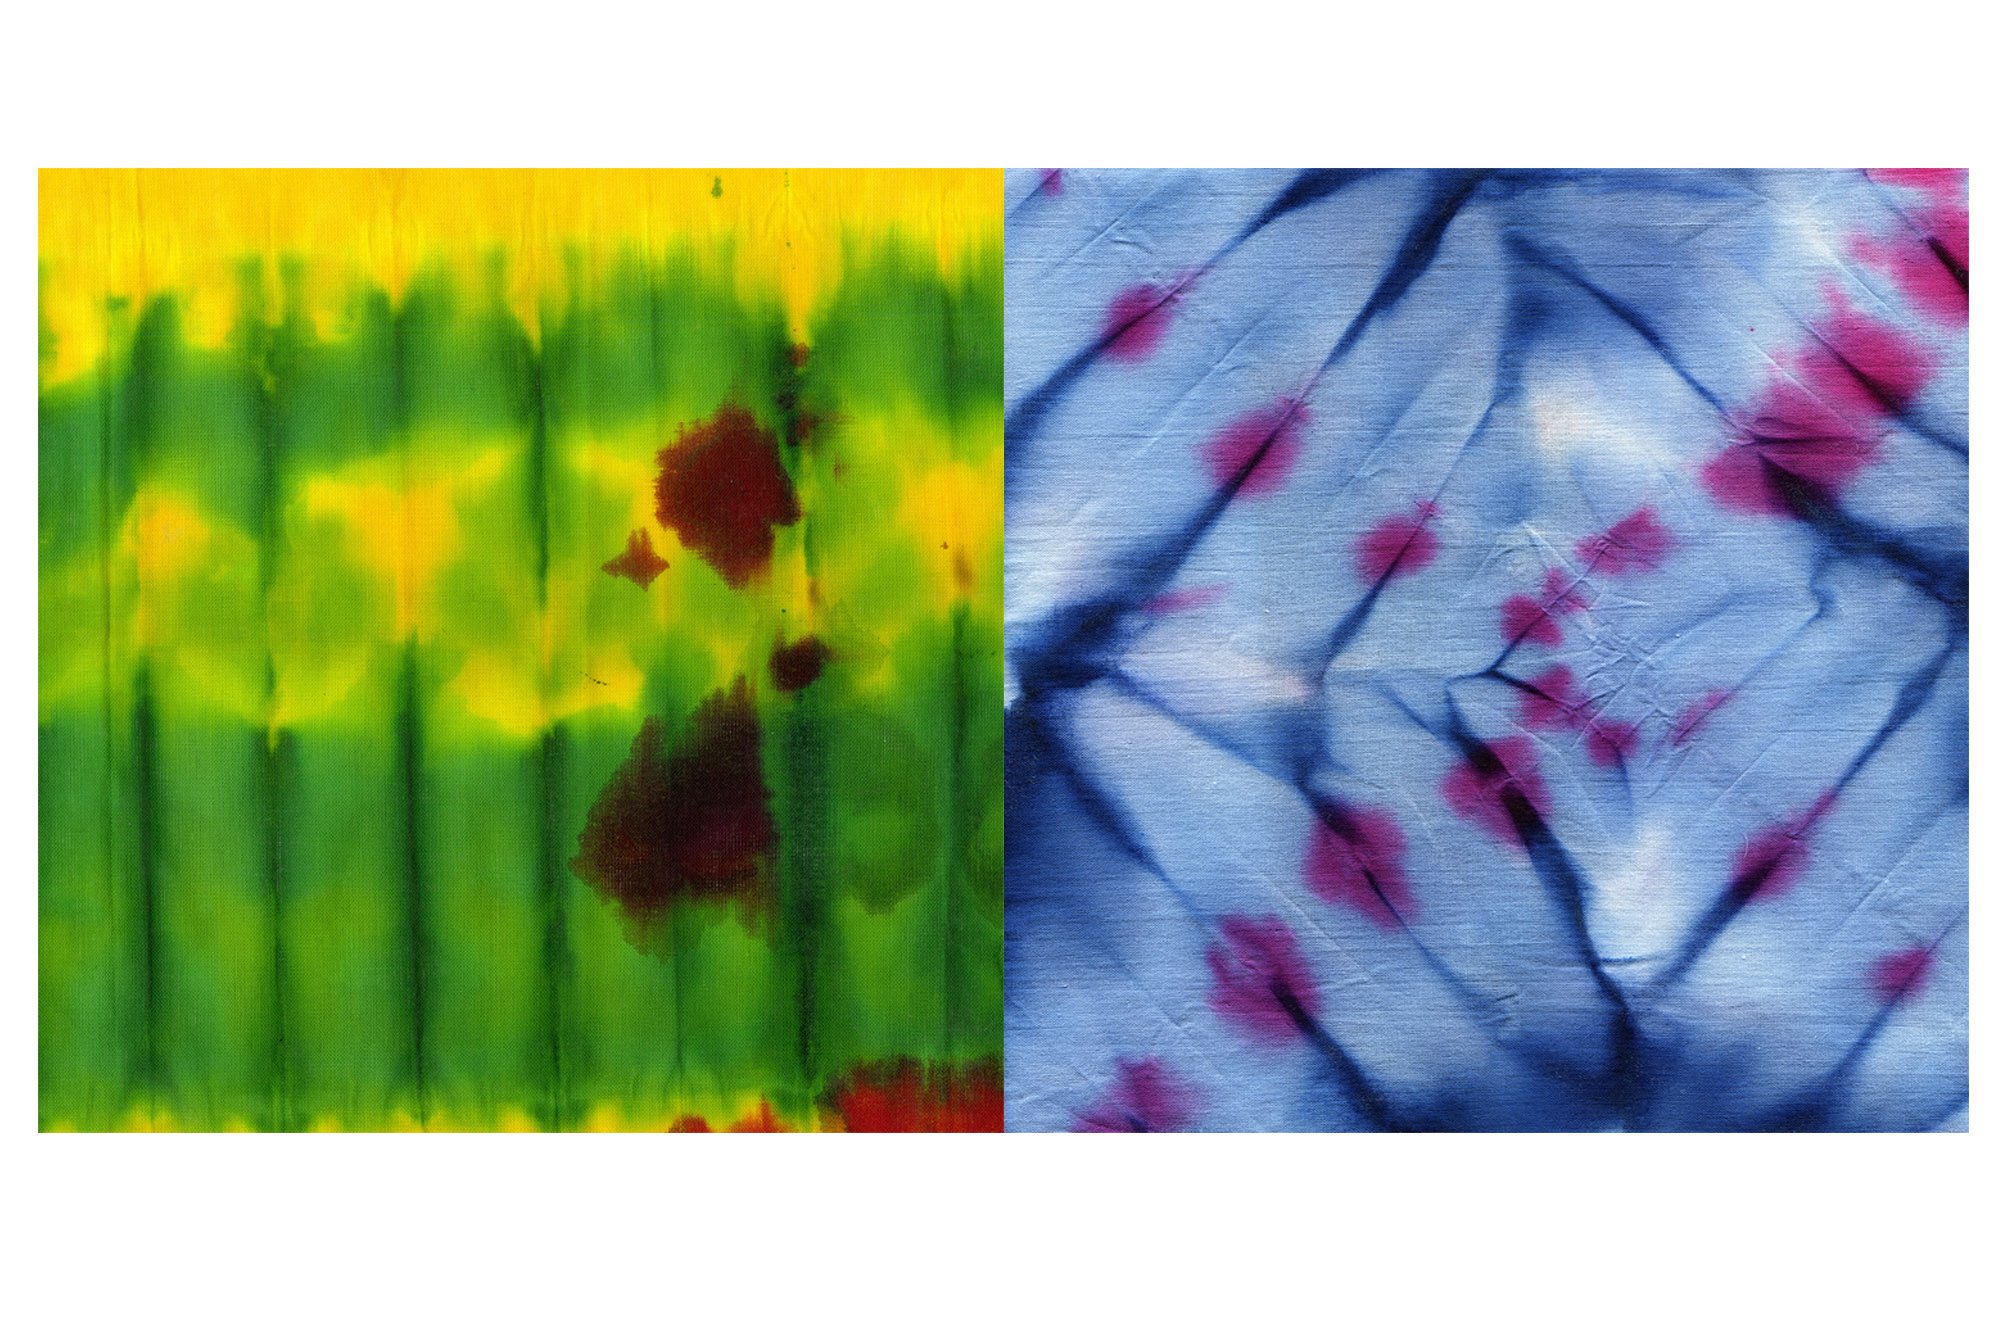 Tie Dye textures 3 preview image.